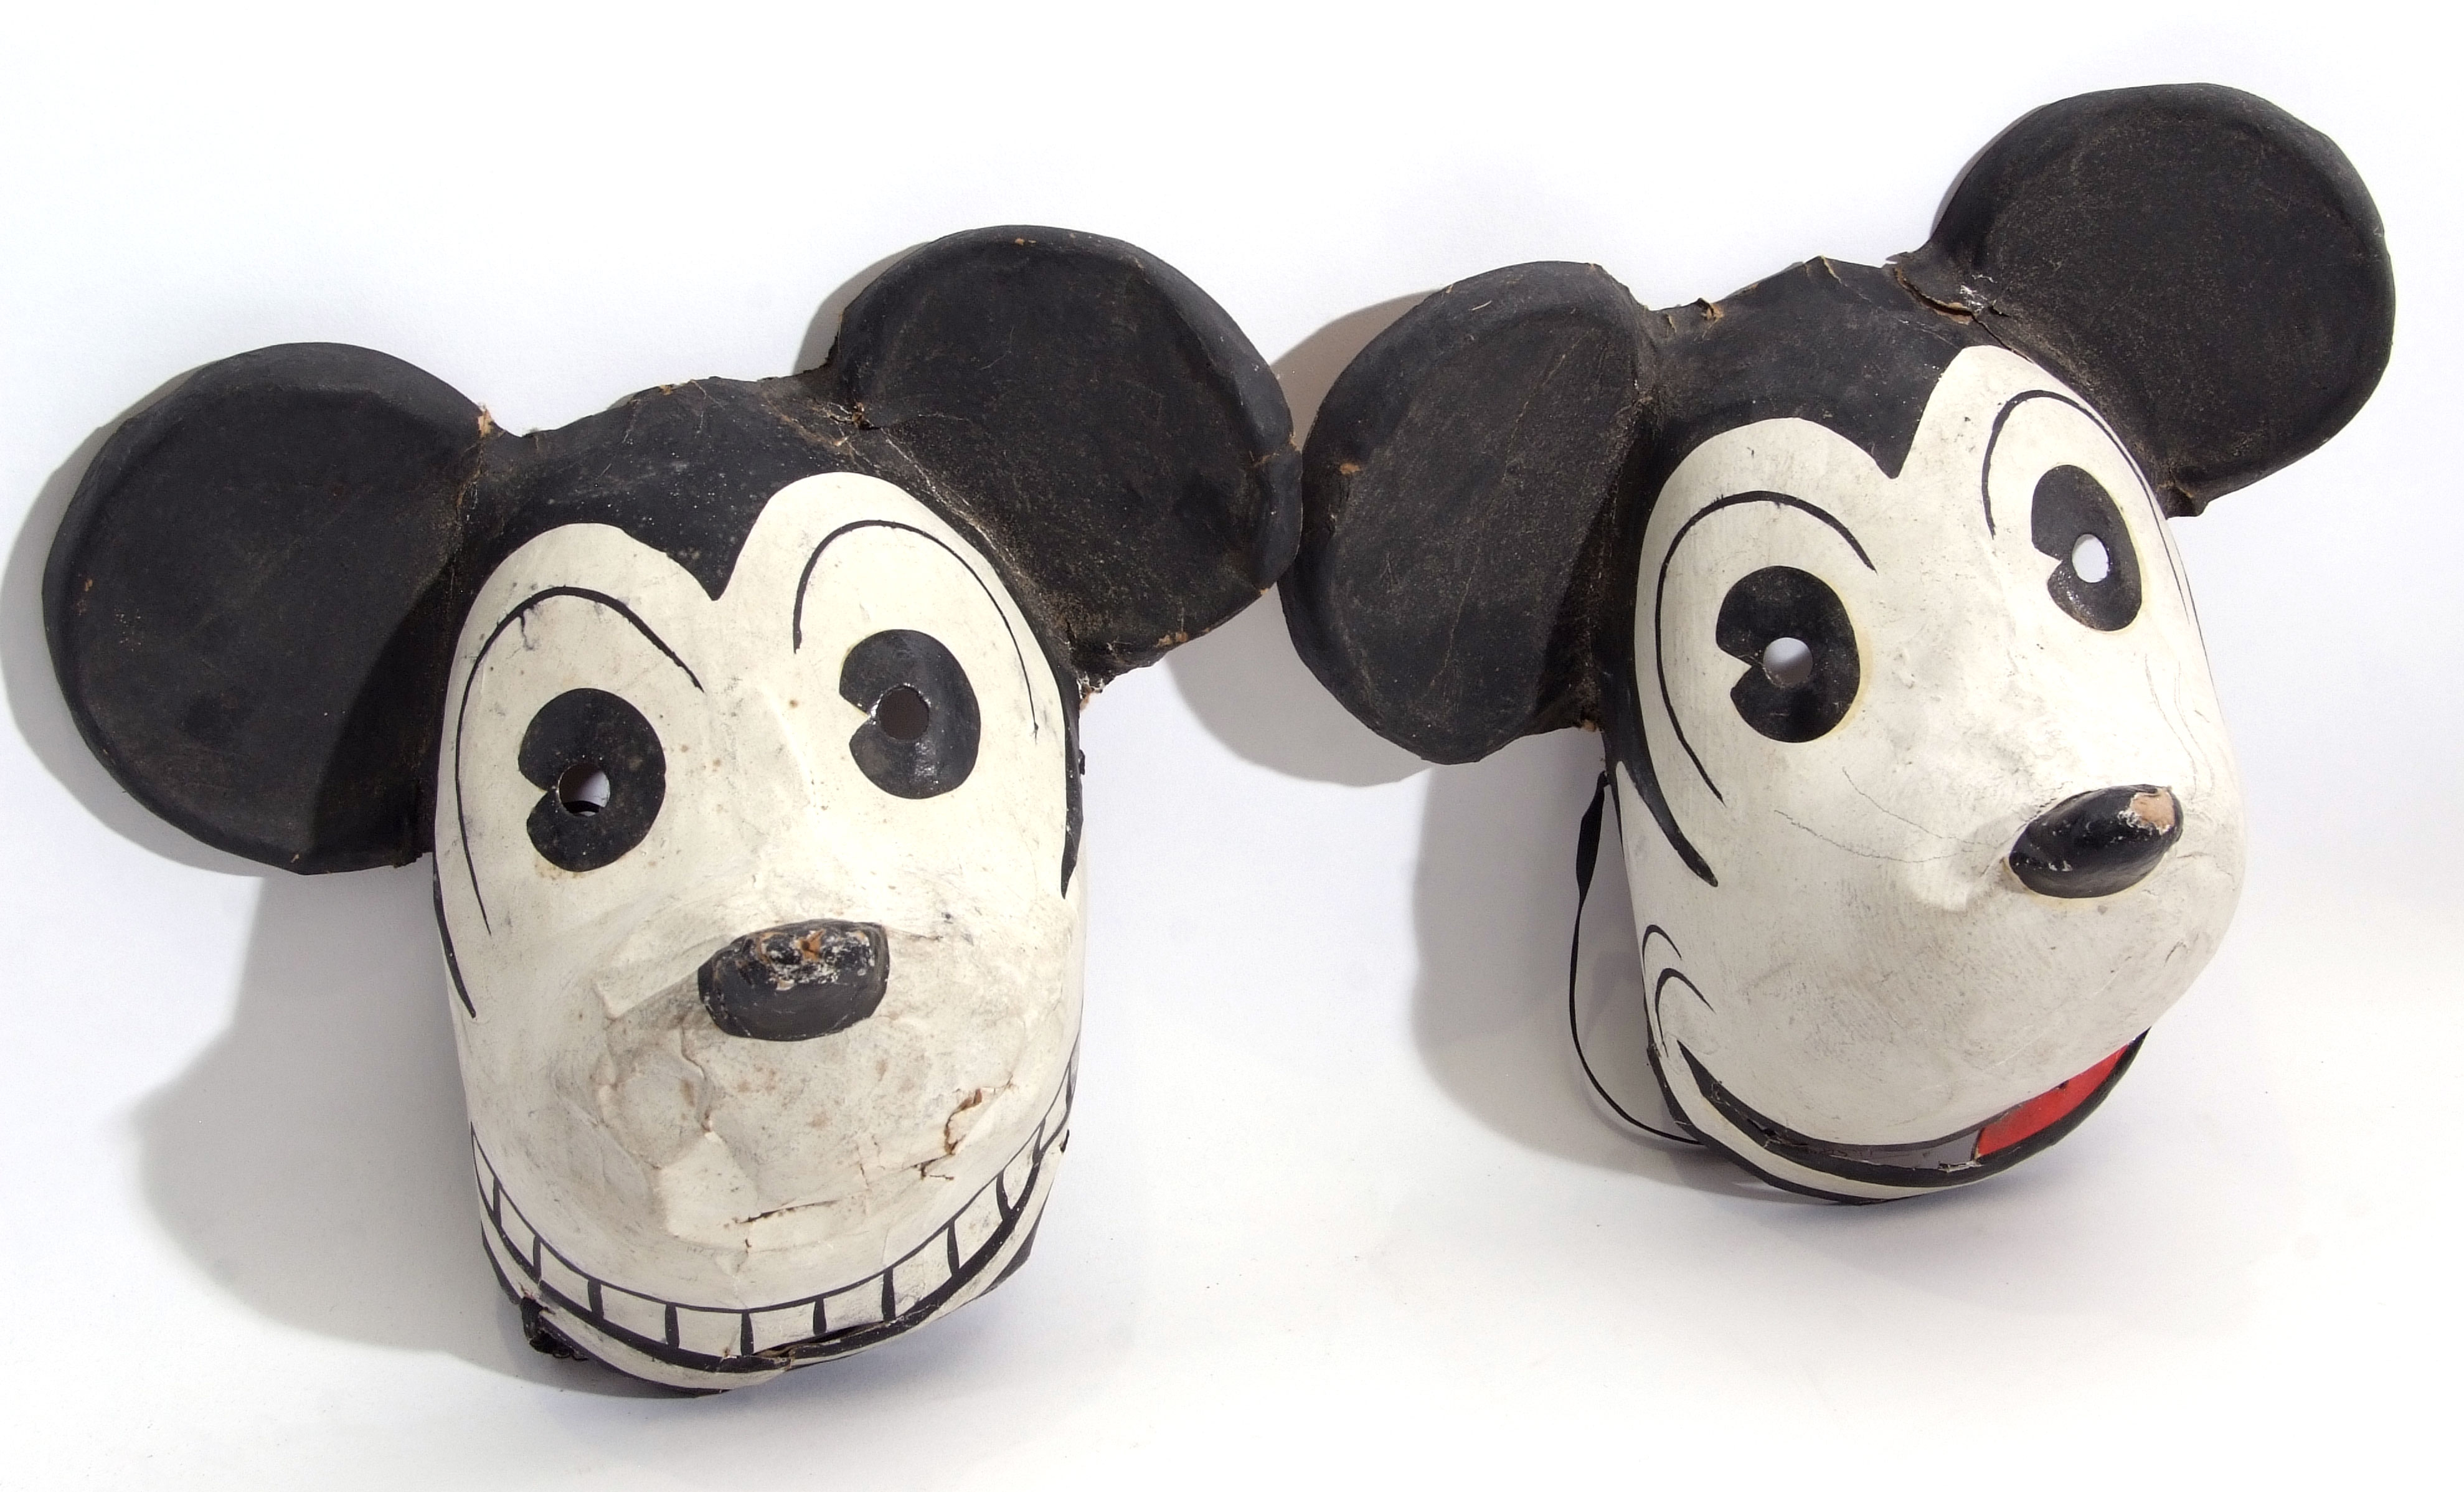 Pair of 1930s Halloween masks modelled as Mickey Mouse, made for the German market circa 1930s